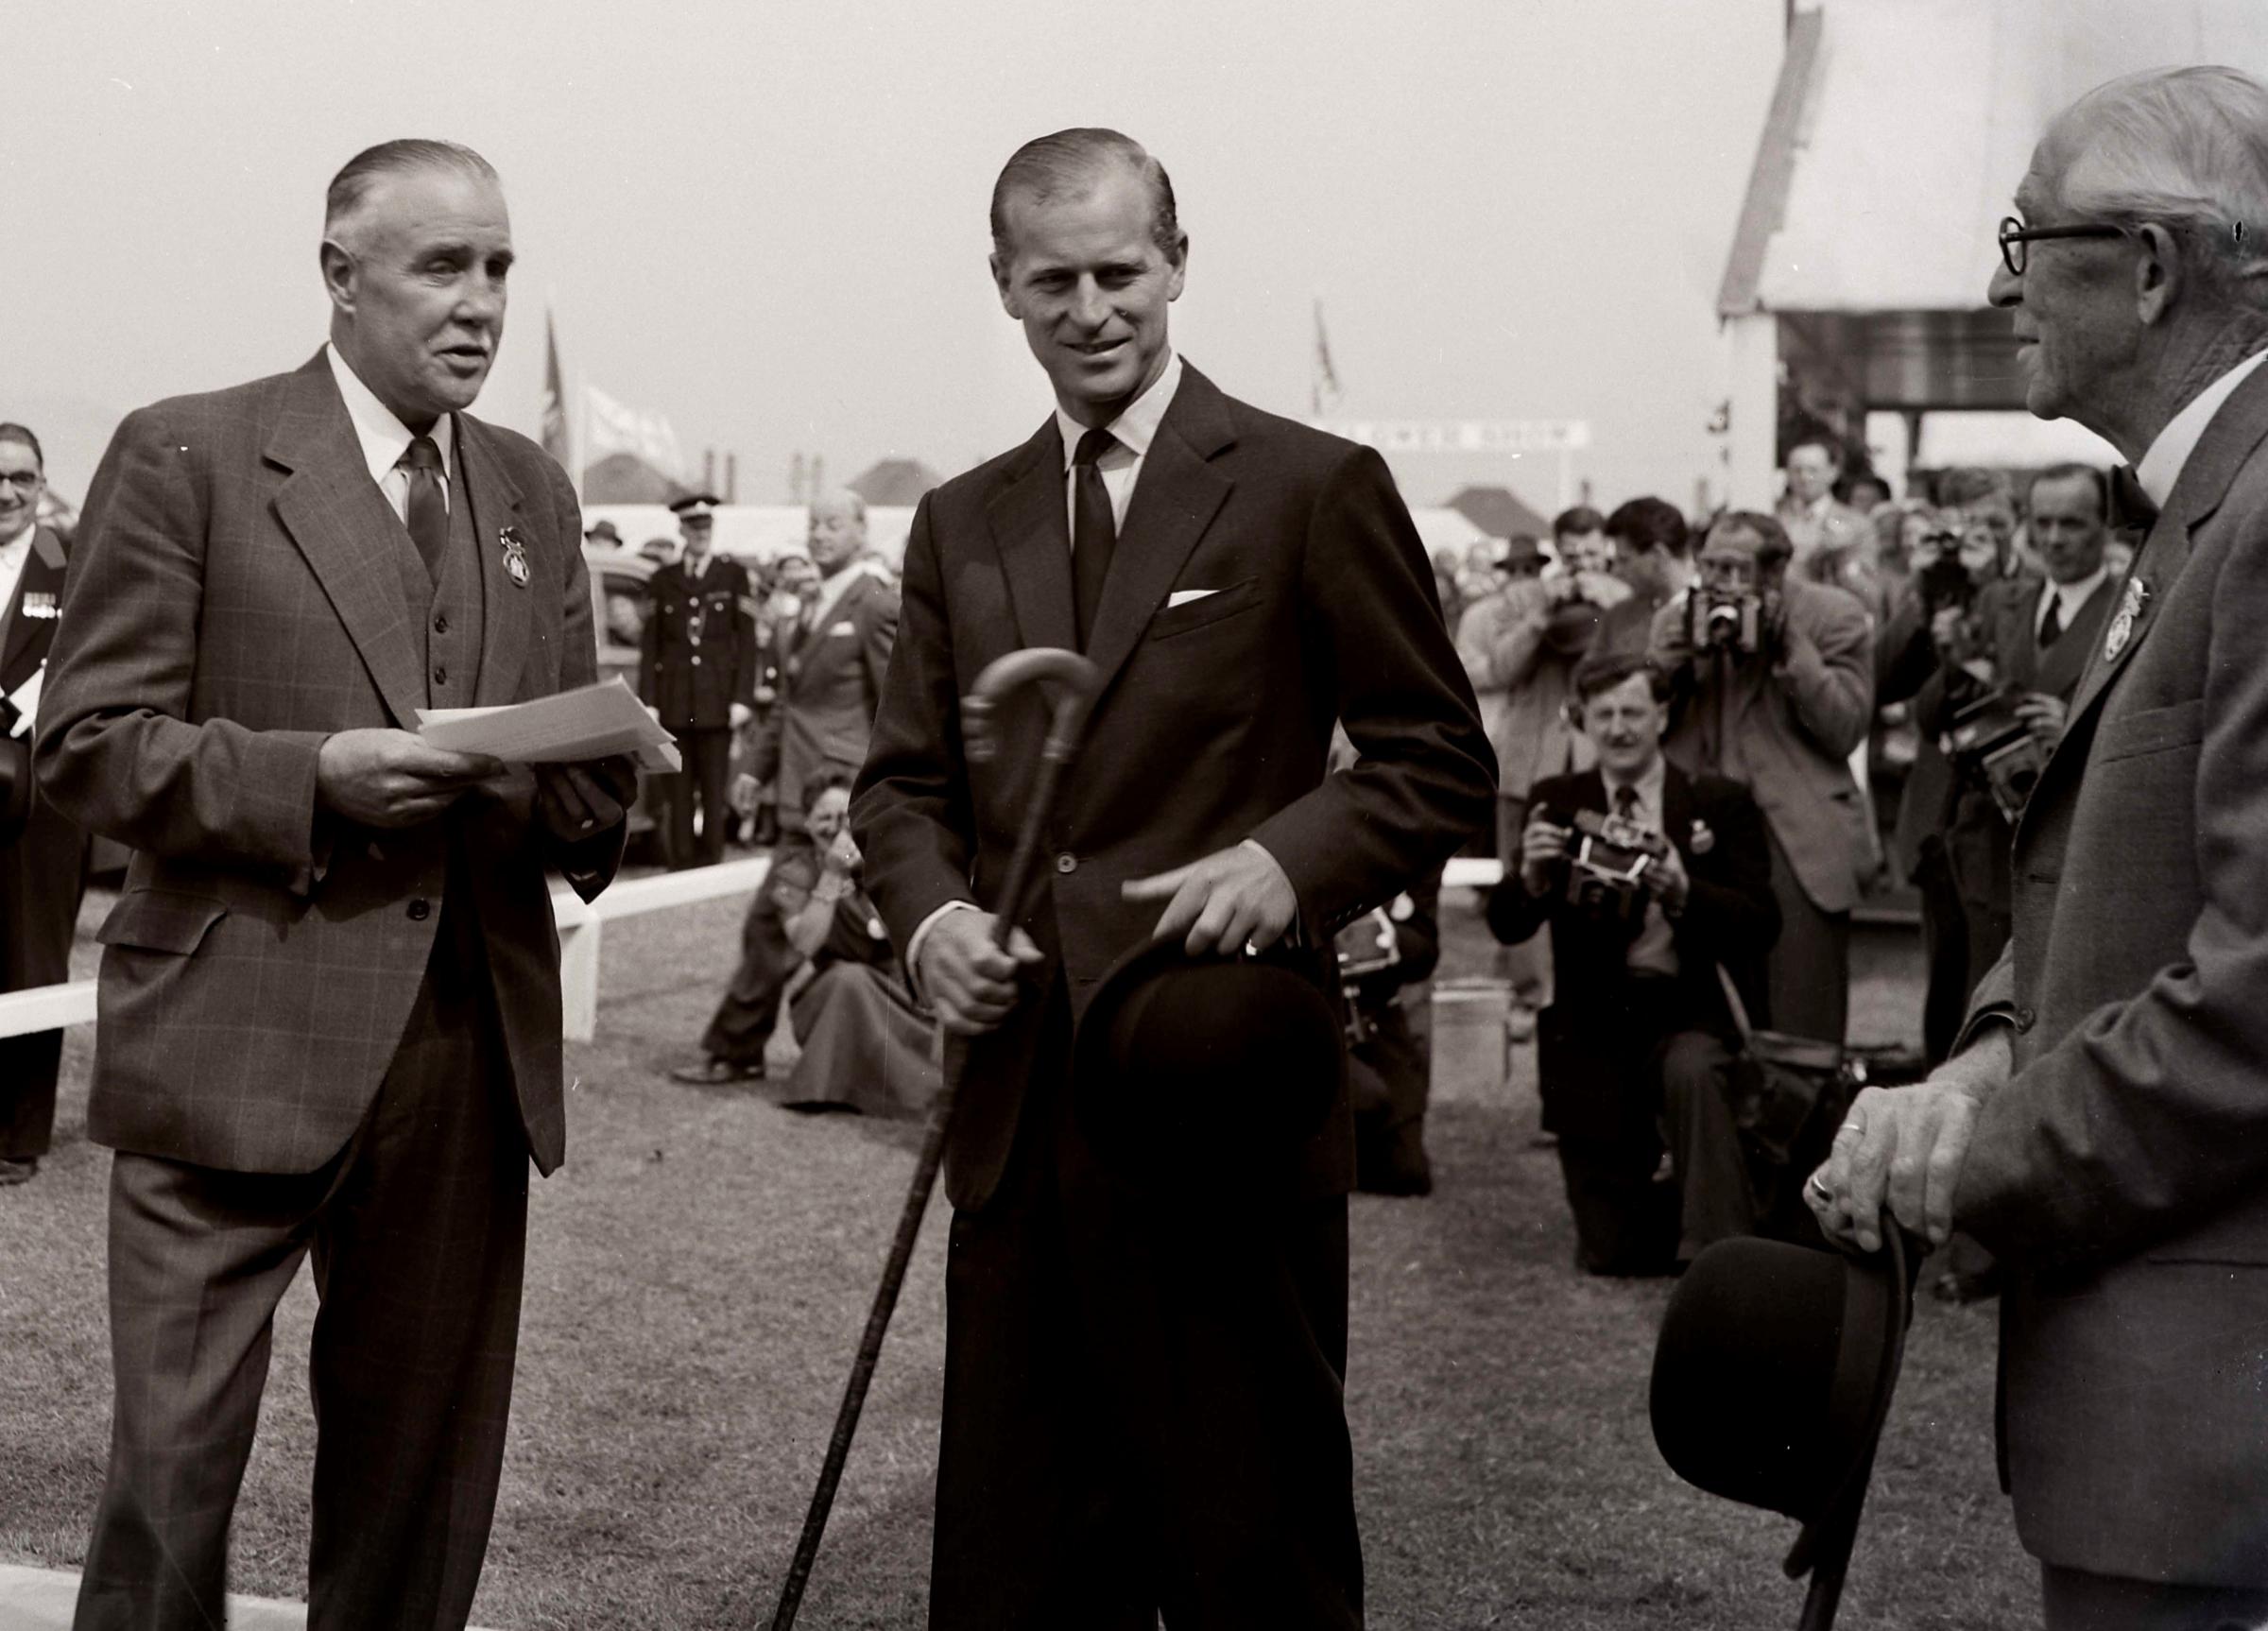 Prince Philip attending the Highland Show in Edinburgh in June, 1955 Picture ref: 1588-12